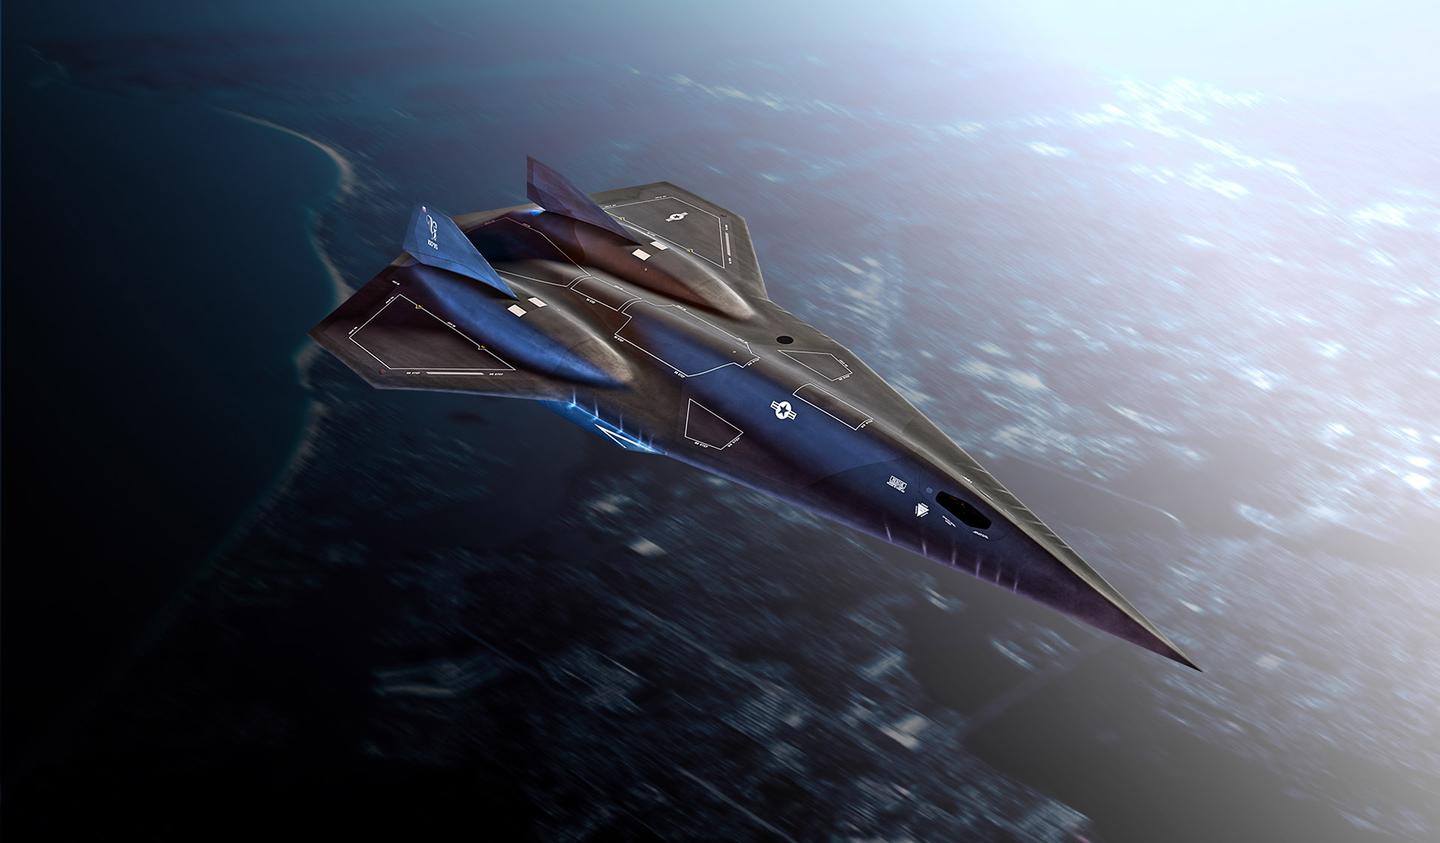 The Darkstar hypersonic jet featured in Top Gun: Maverick is the result of a collaboration with Lockheed Martin's Skunk Works division